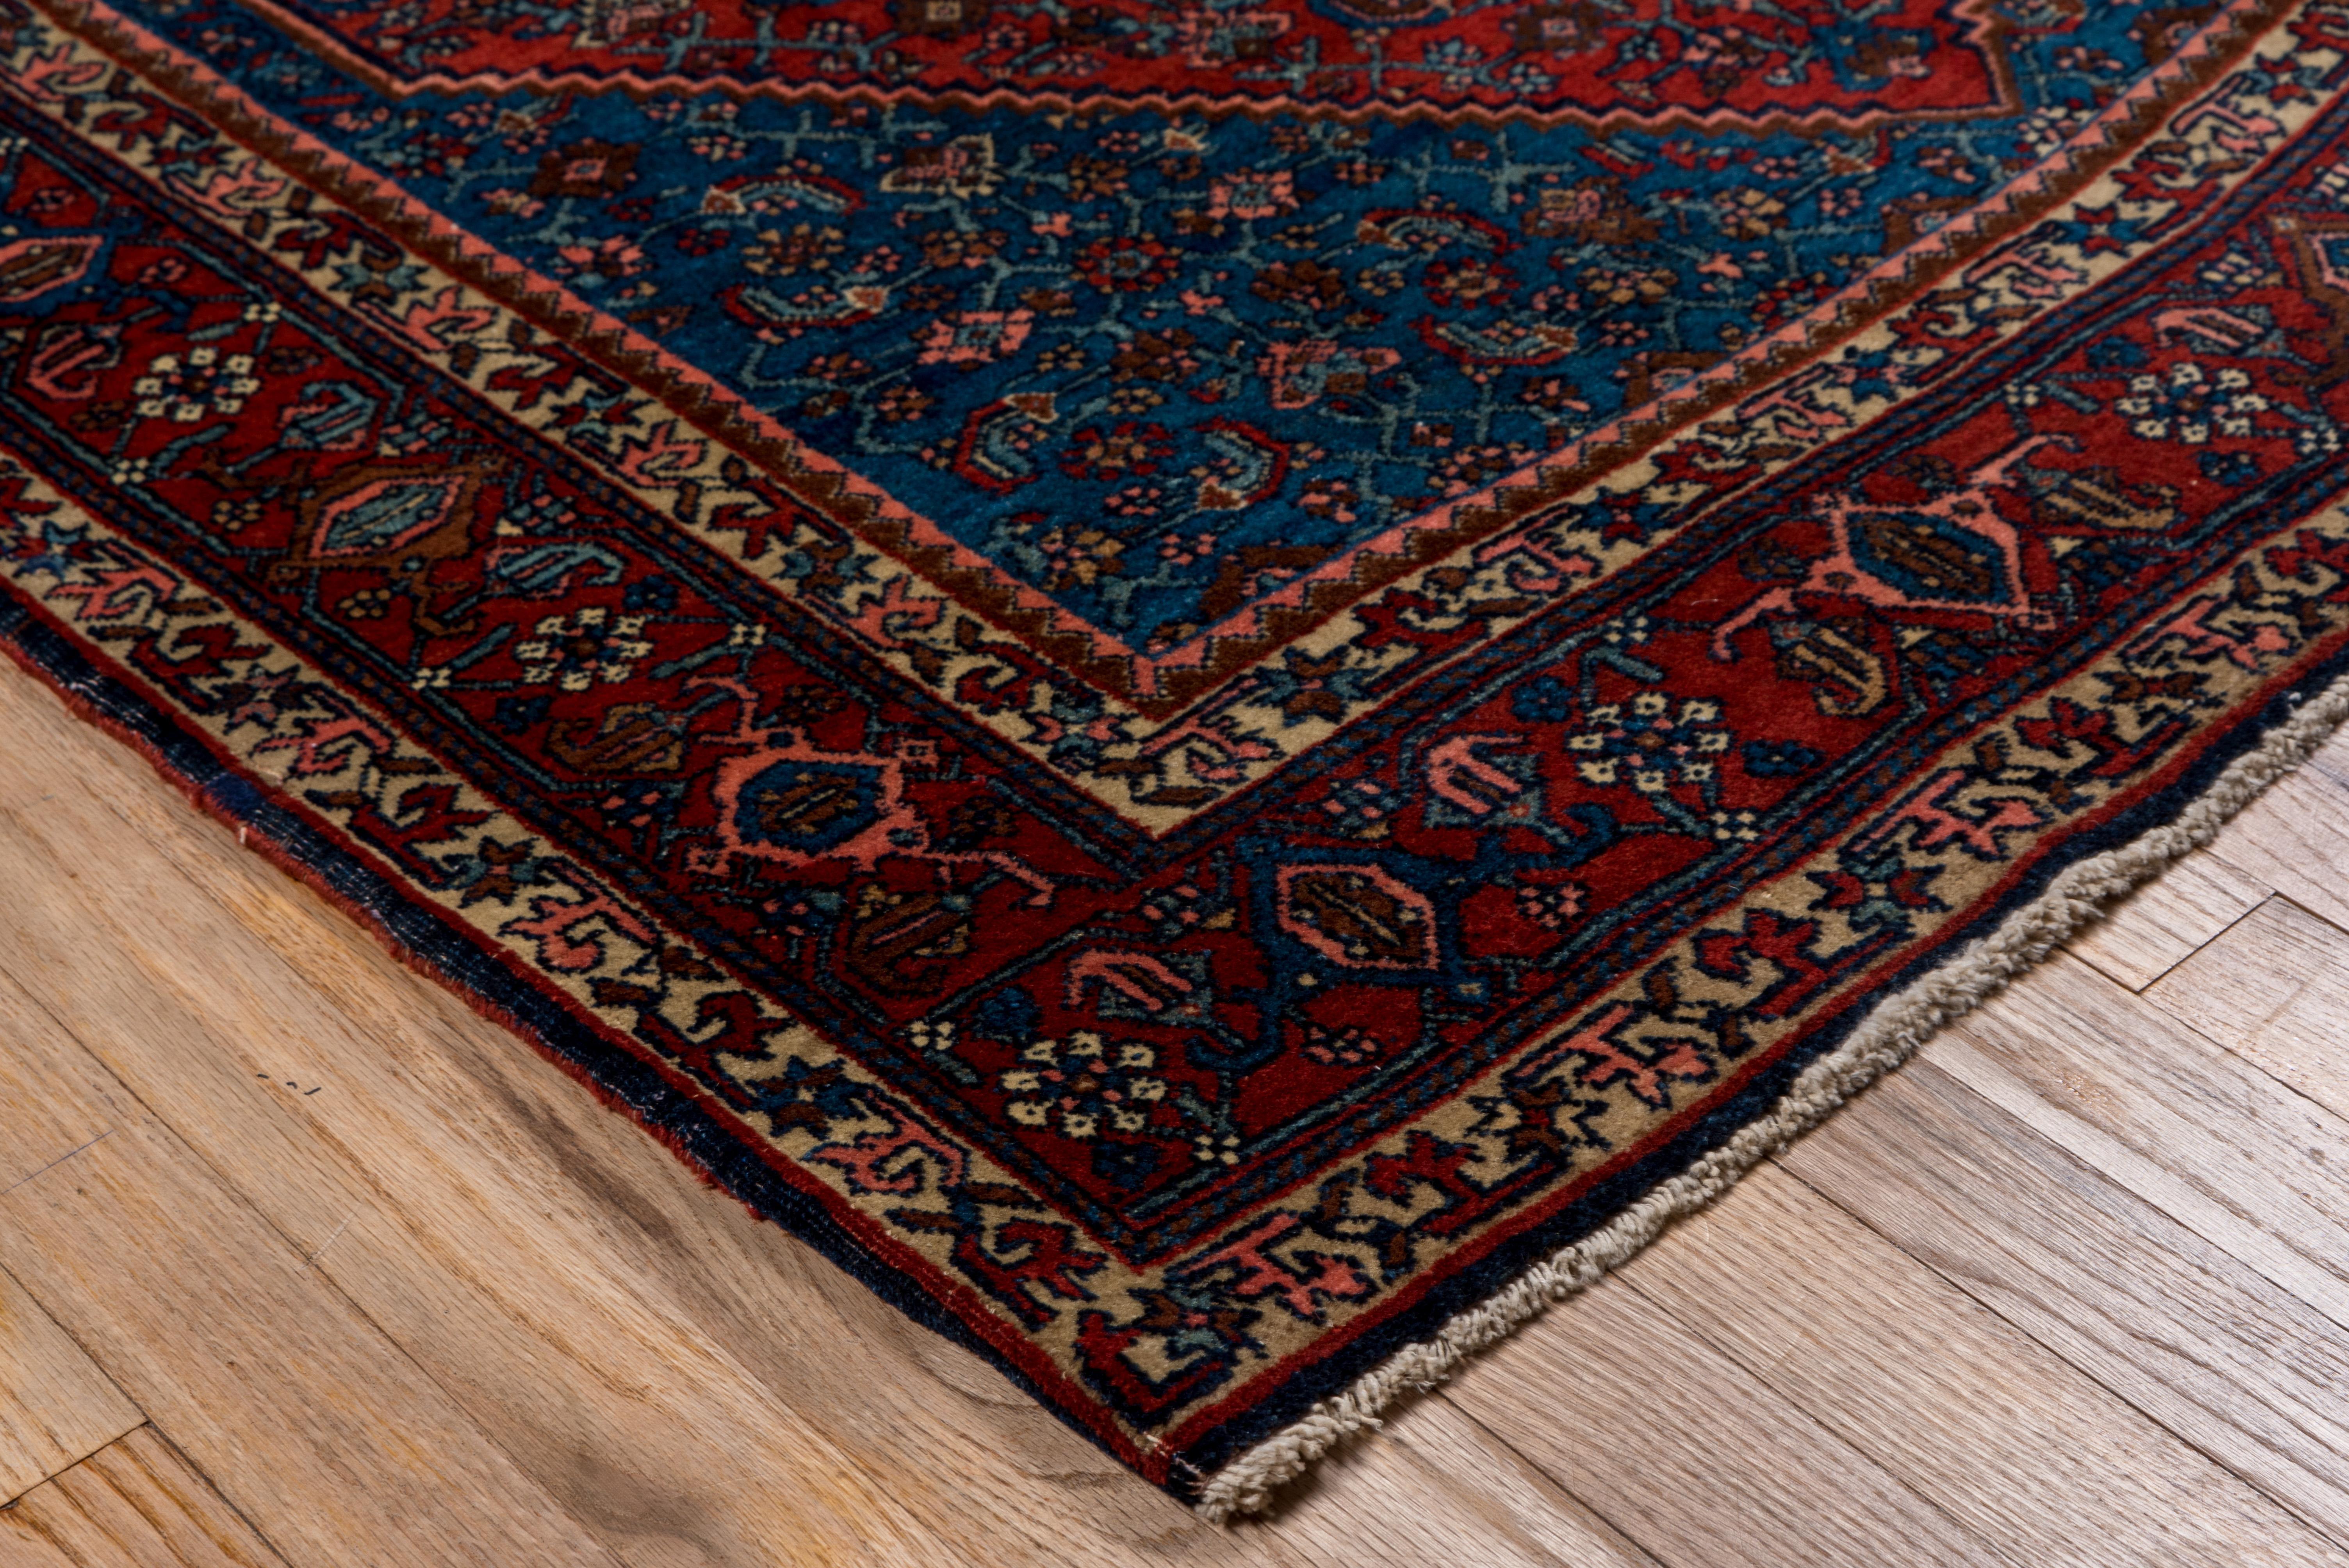 Antique Tribal Persian Bidjar Rug, Dark and Rich Tones, circa 1930s In Excellent Condition For Sale In New York, NY